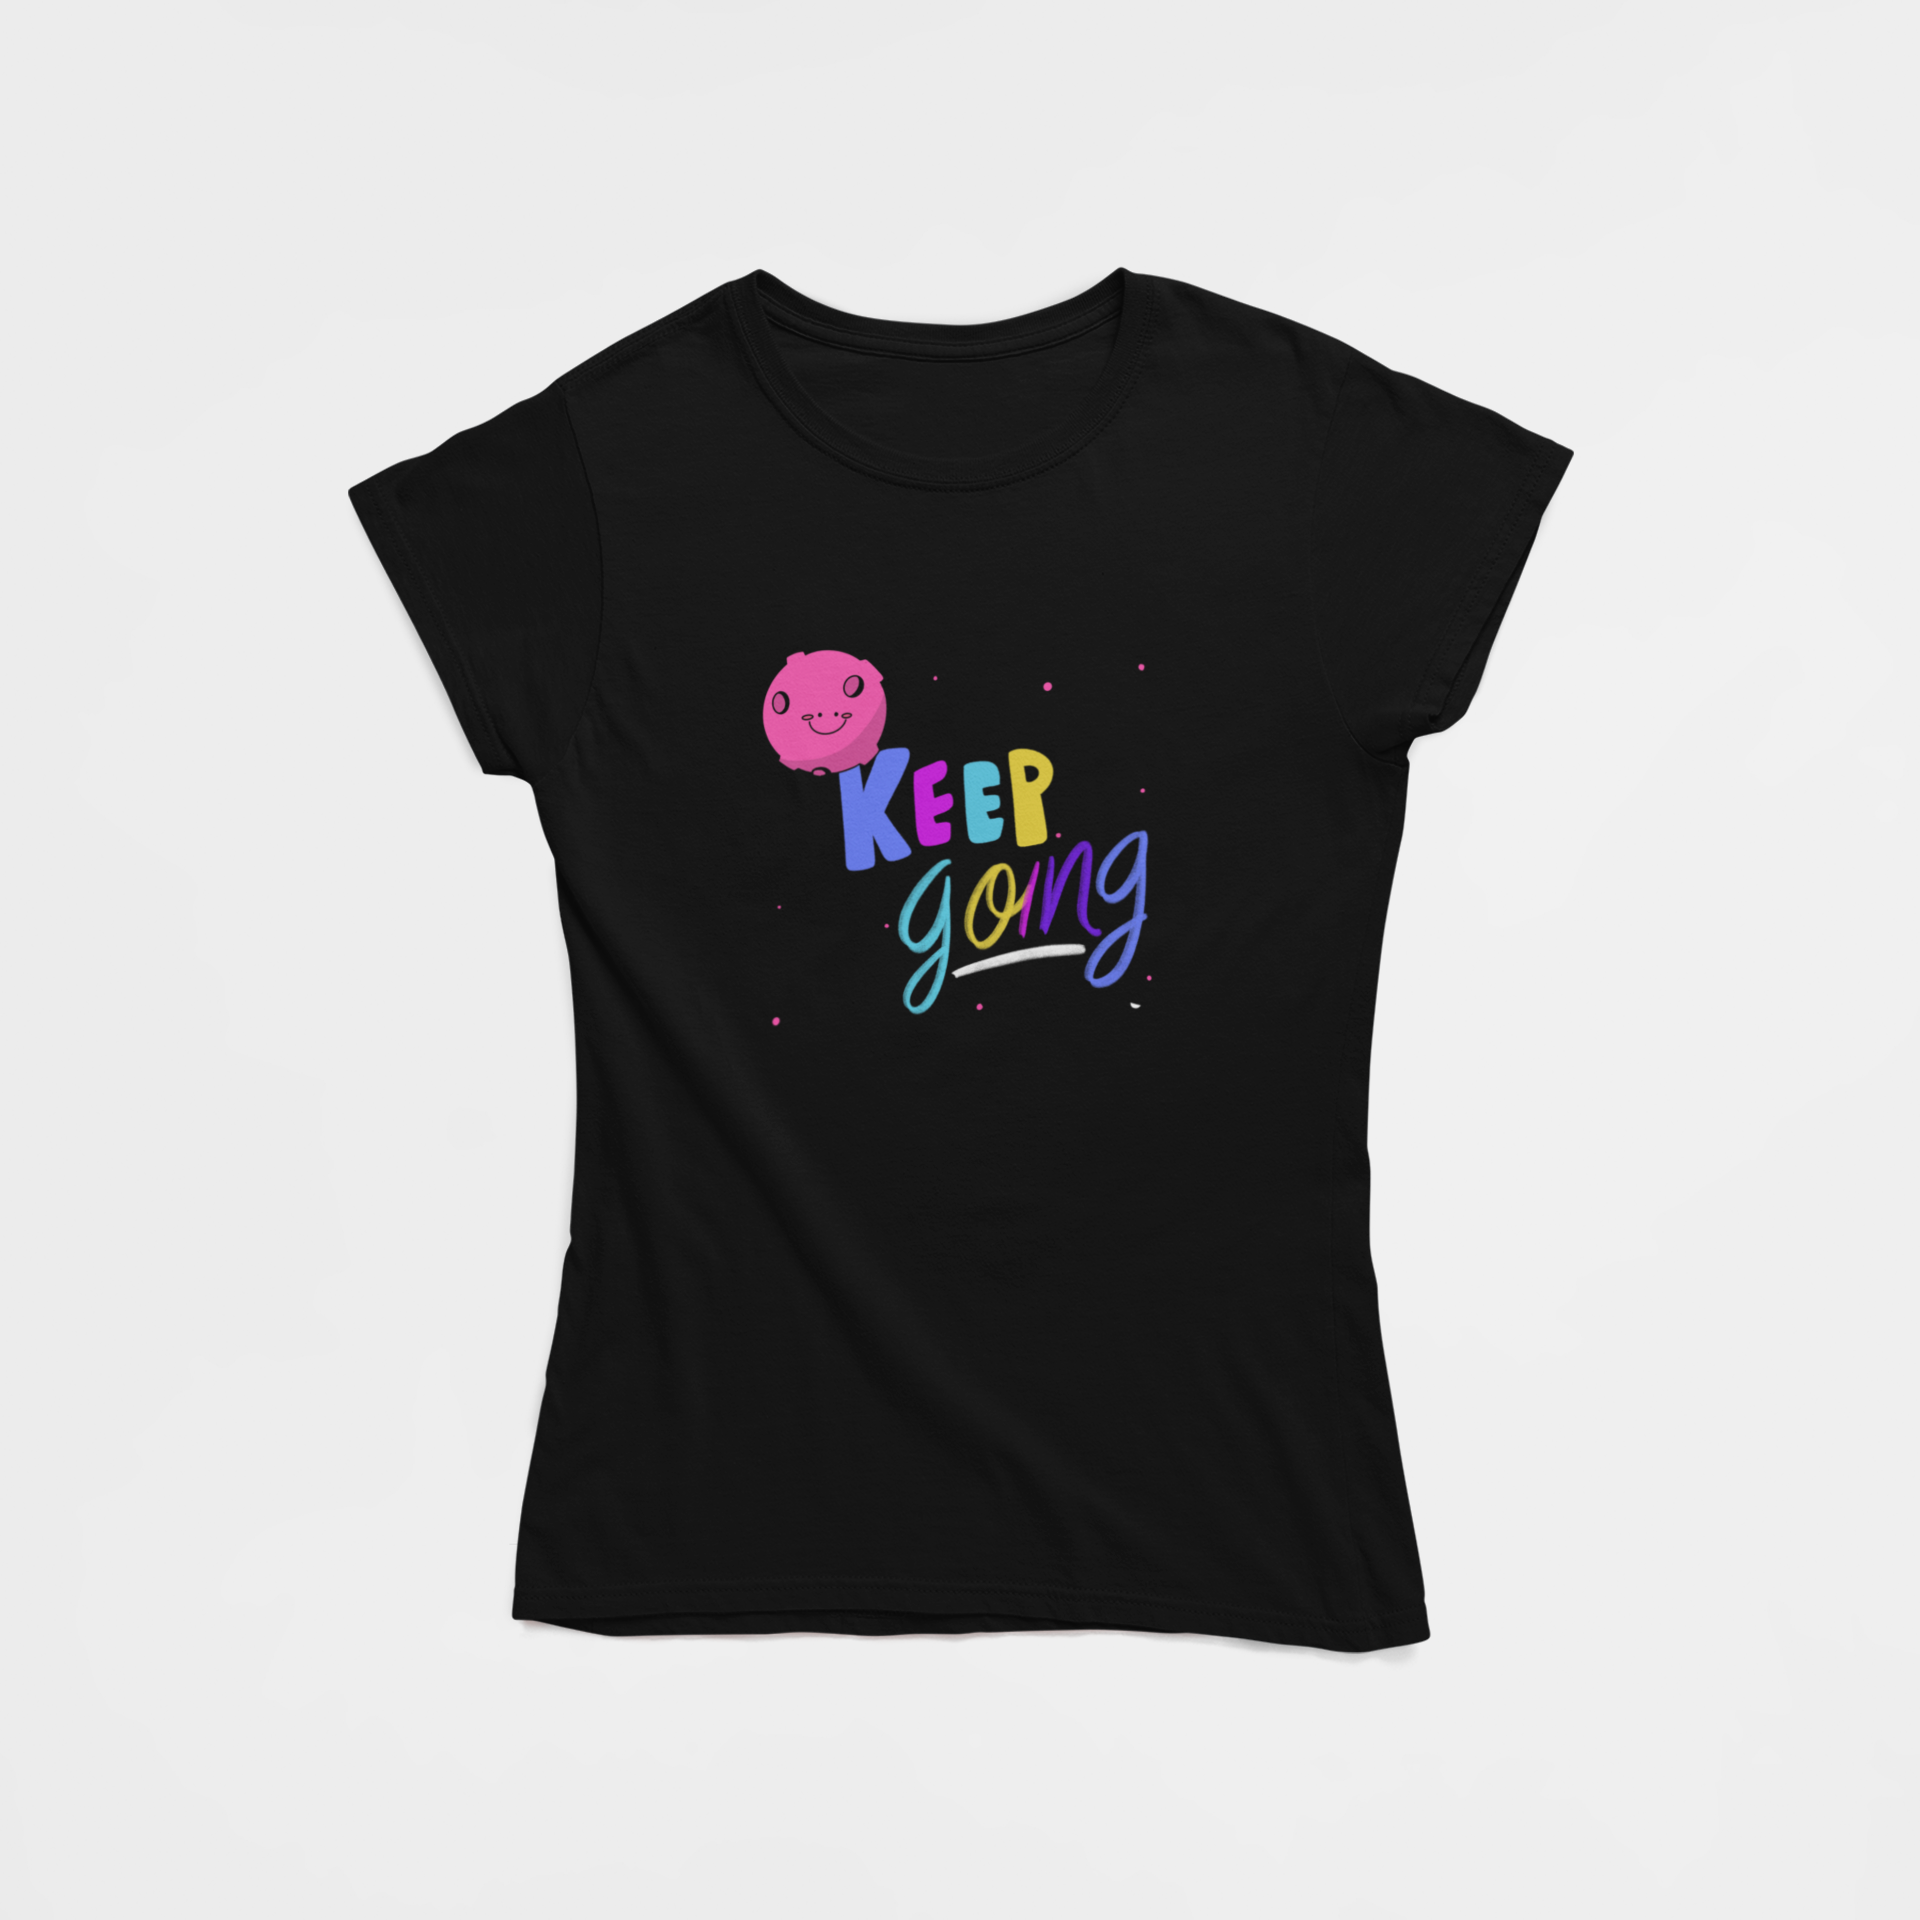 Keep Going Black Round Neck T-Shirt for Women. 